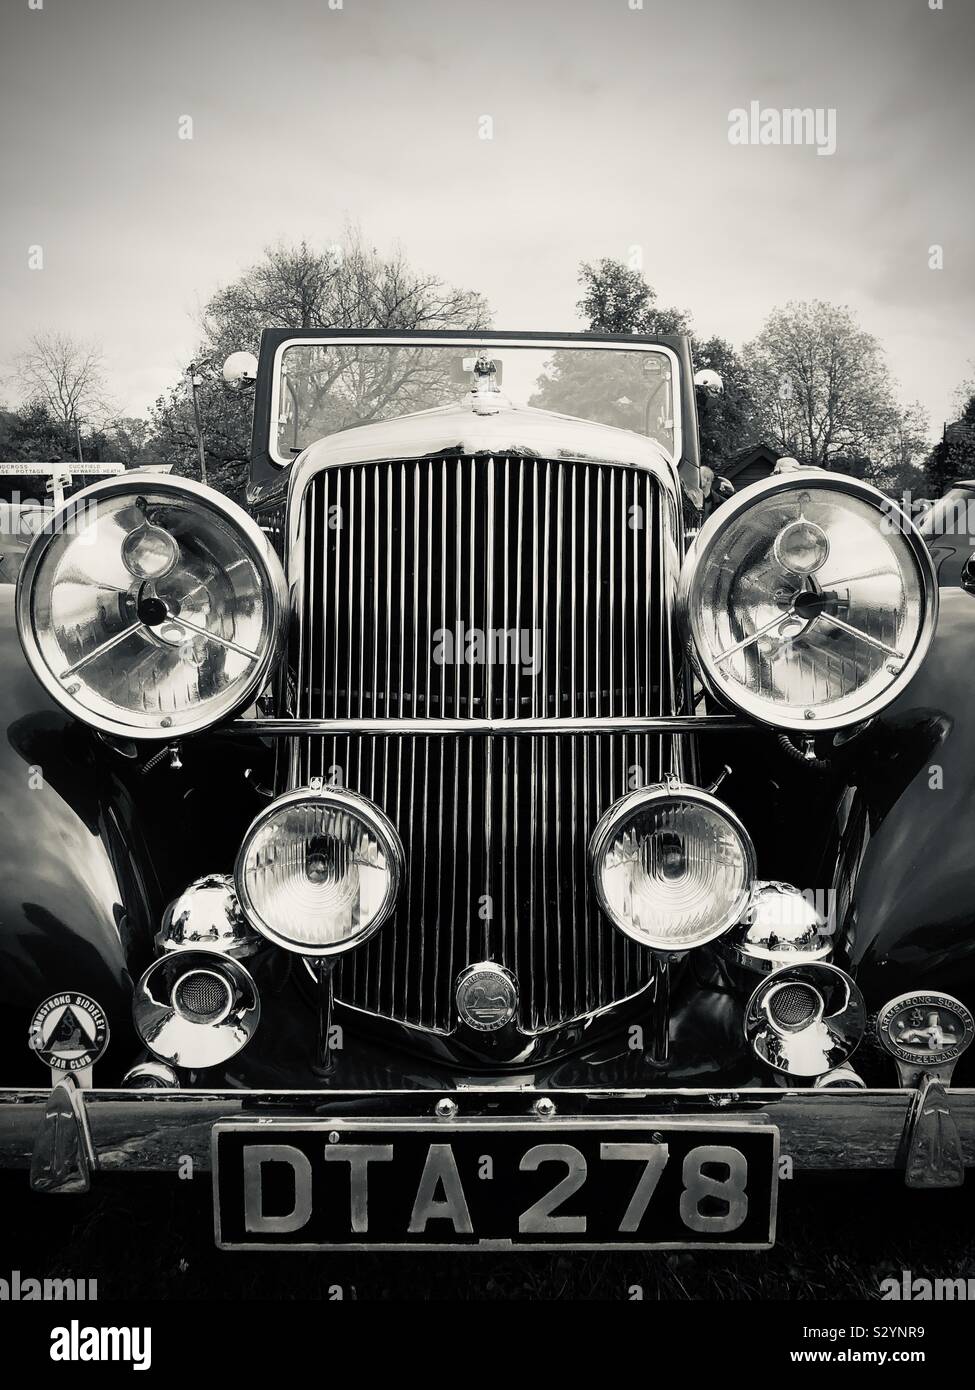 A vintage Armstrong Siddeley car Stock Photo - Alamy